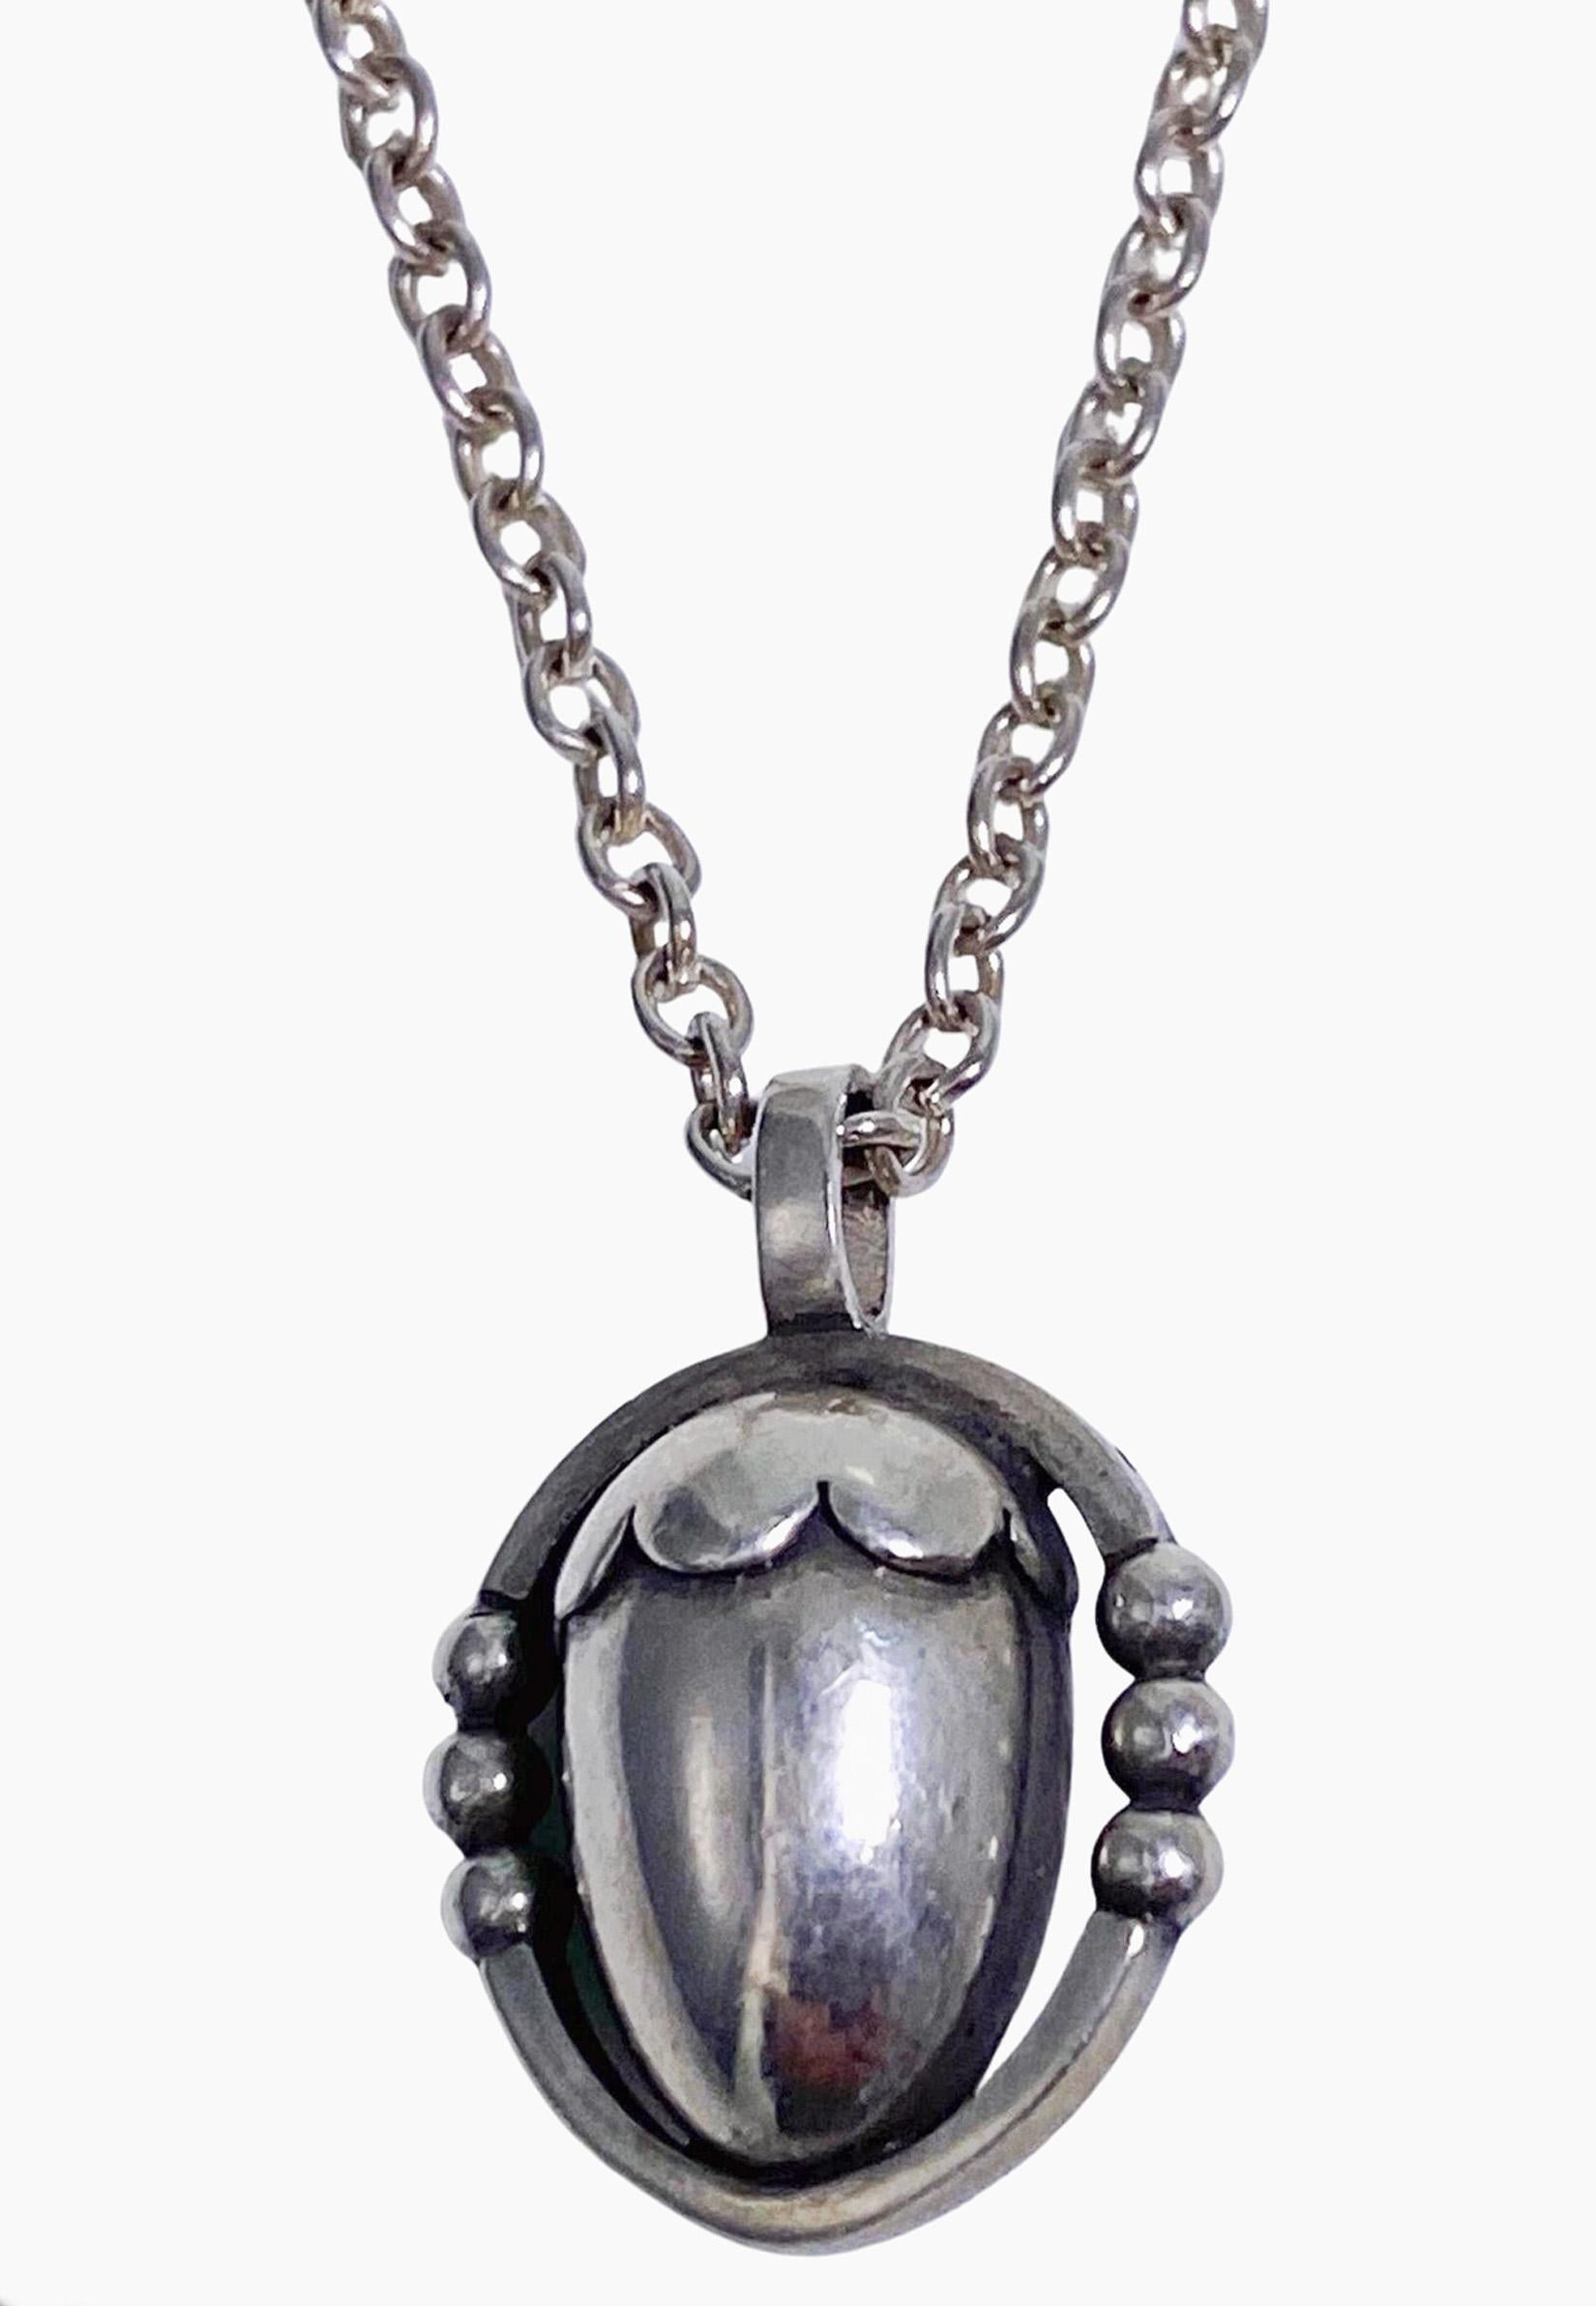 Georg Jensen Sterling Acorn Pendant No 188 design by Georg Jensen himself 1866 – 1935. No longer in production. Height of drop 0.90 inch. Length of chain 24 inches. Georg Jensen marks and 925S Denmark and 188 design number. Item weight: 18.20 grams. 